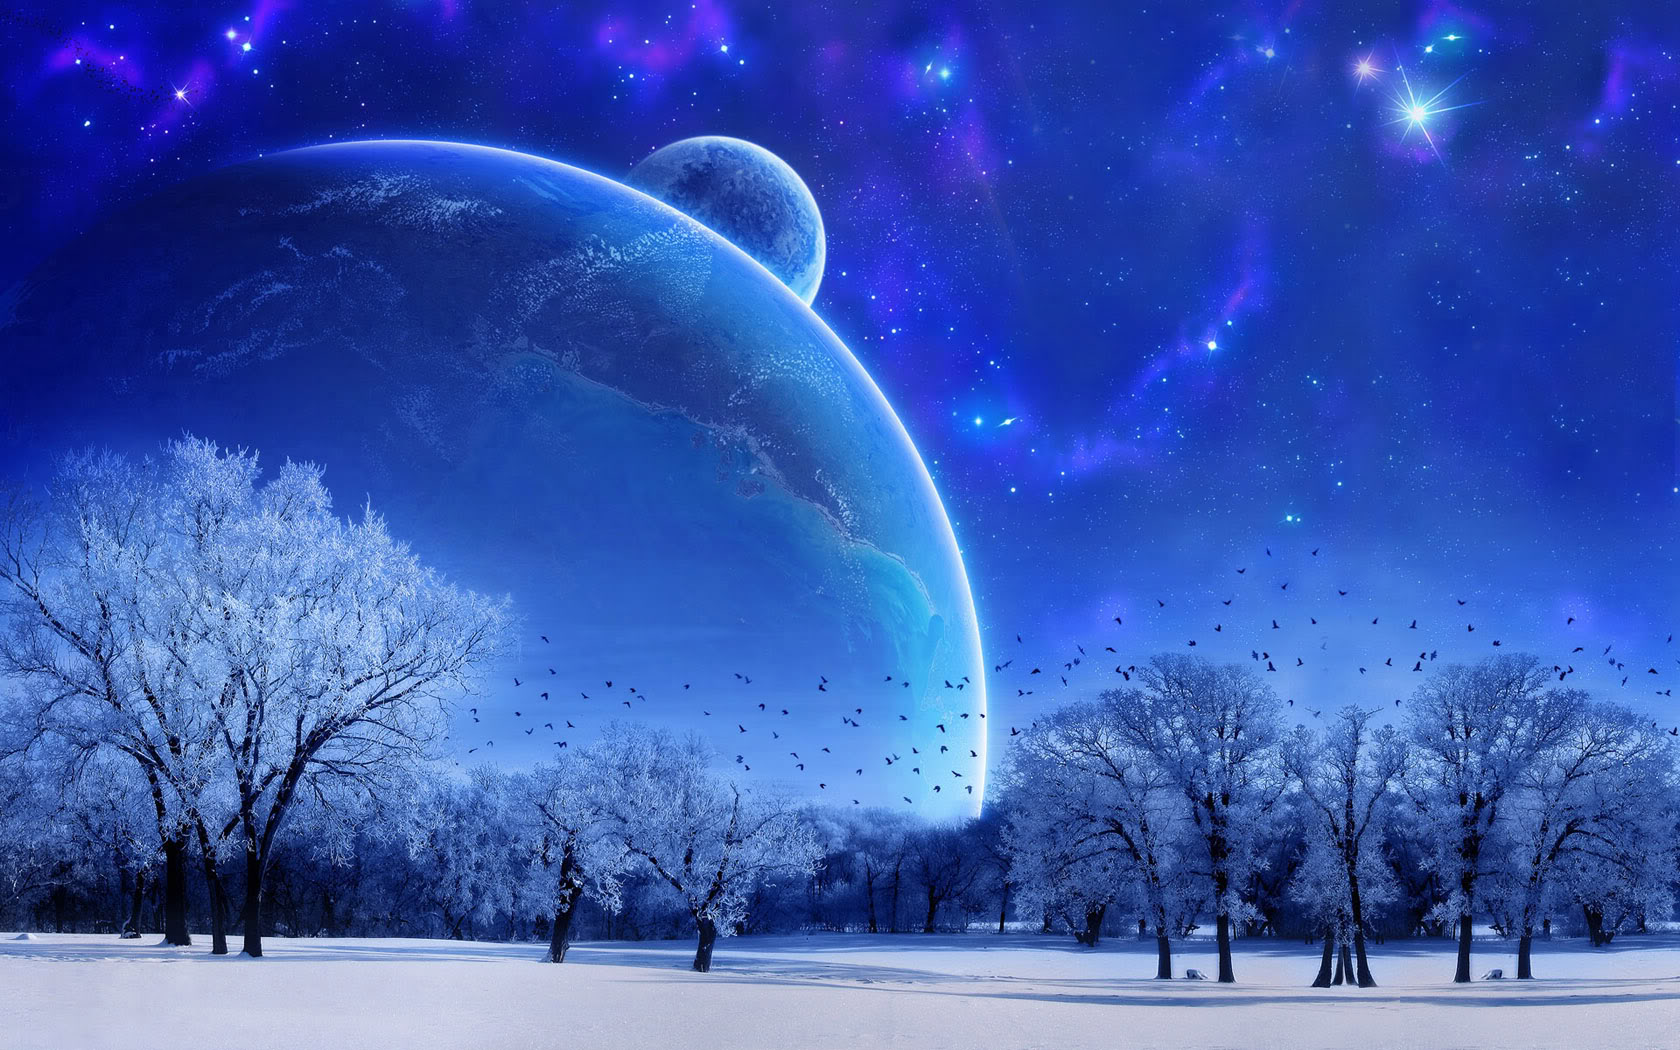 Download High quality Peacefull Winter Science Fiction (Sci-fi) wallpaper / 1680x1050